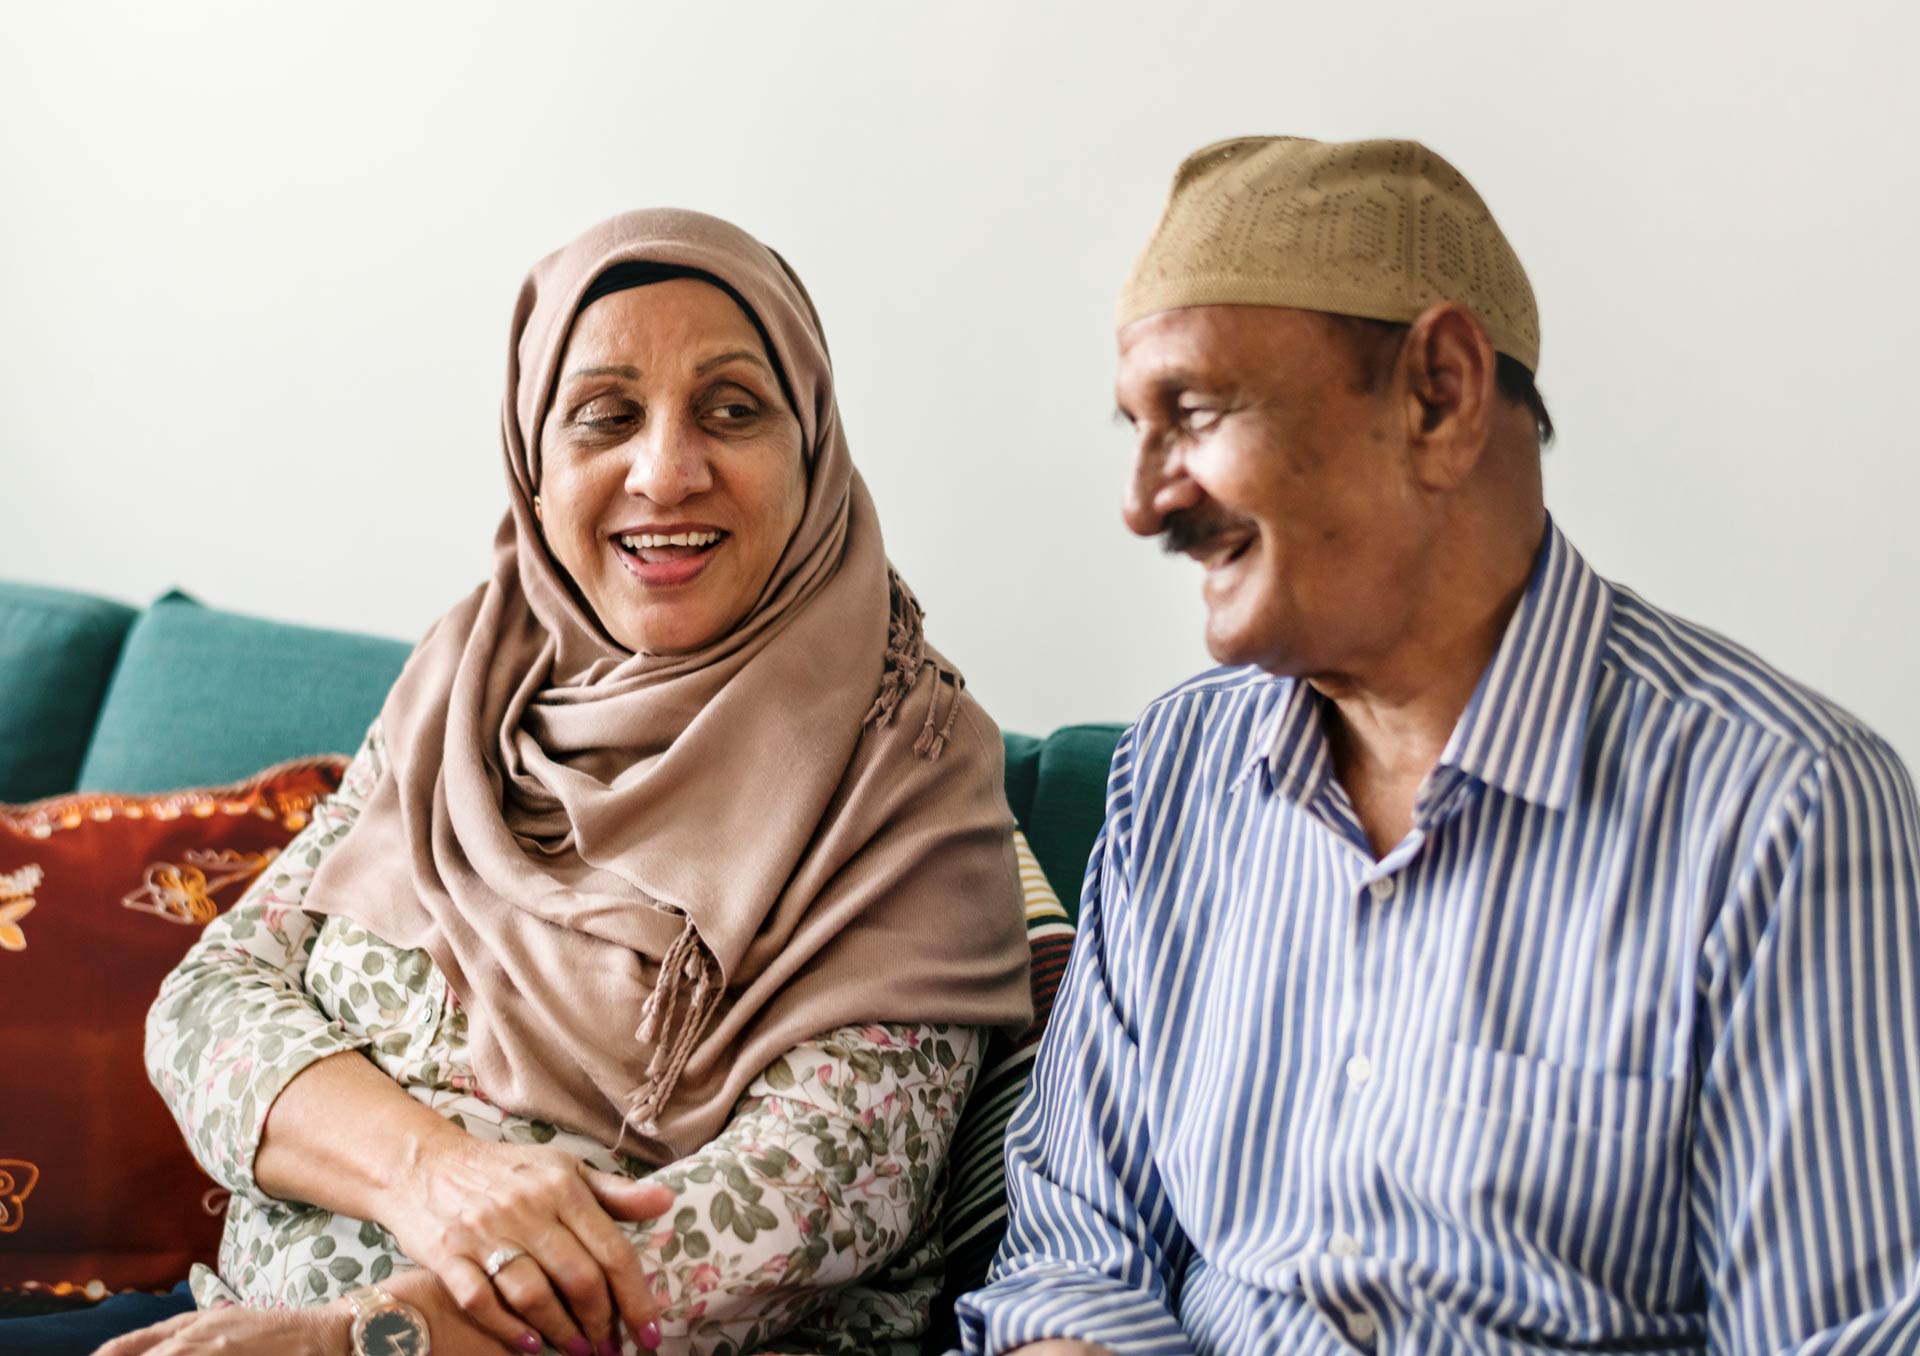 Recommendations for improving  outcomes in housing and care for our ageing BAME population and all older people